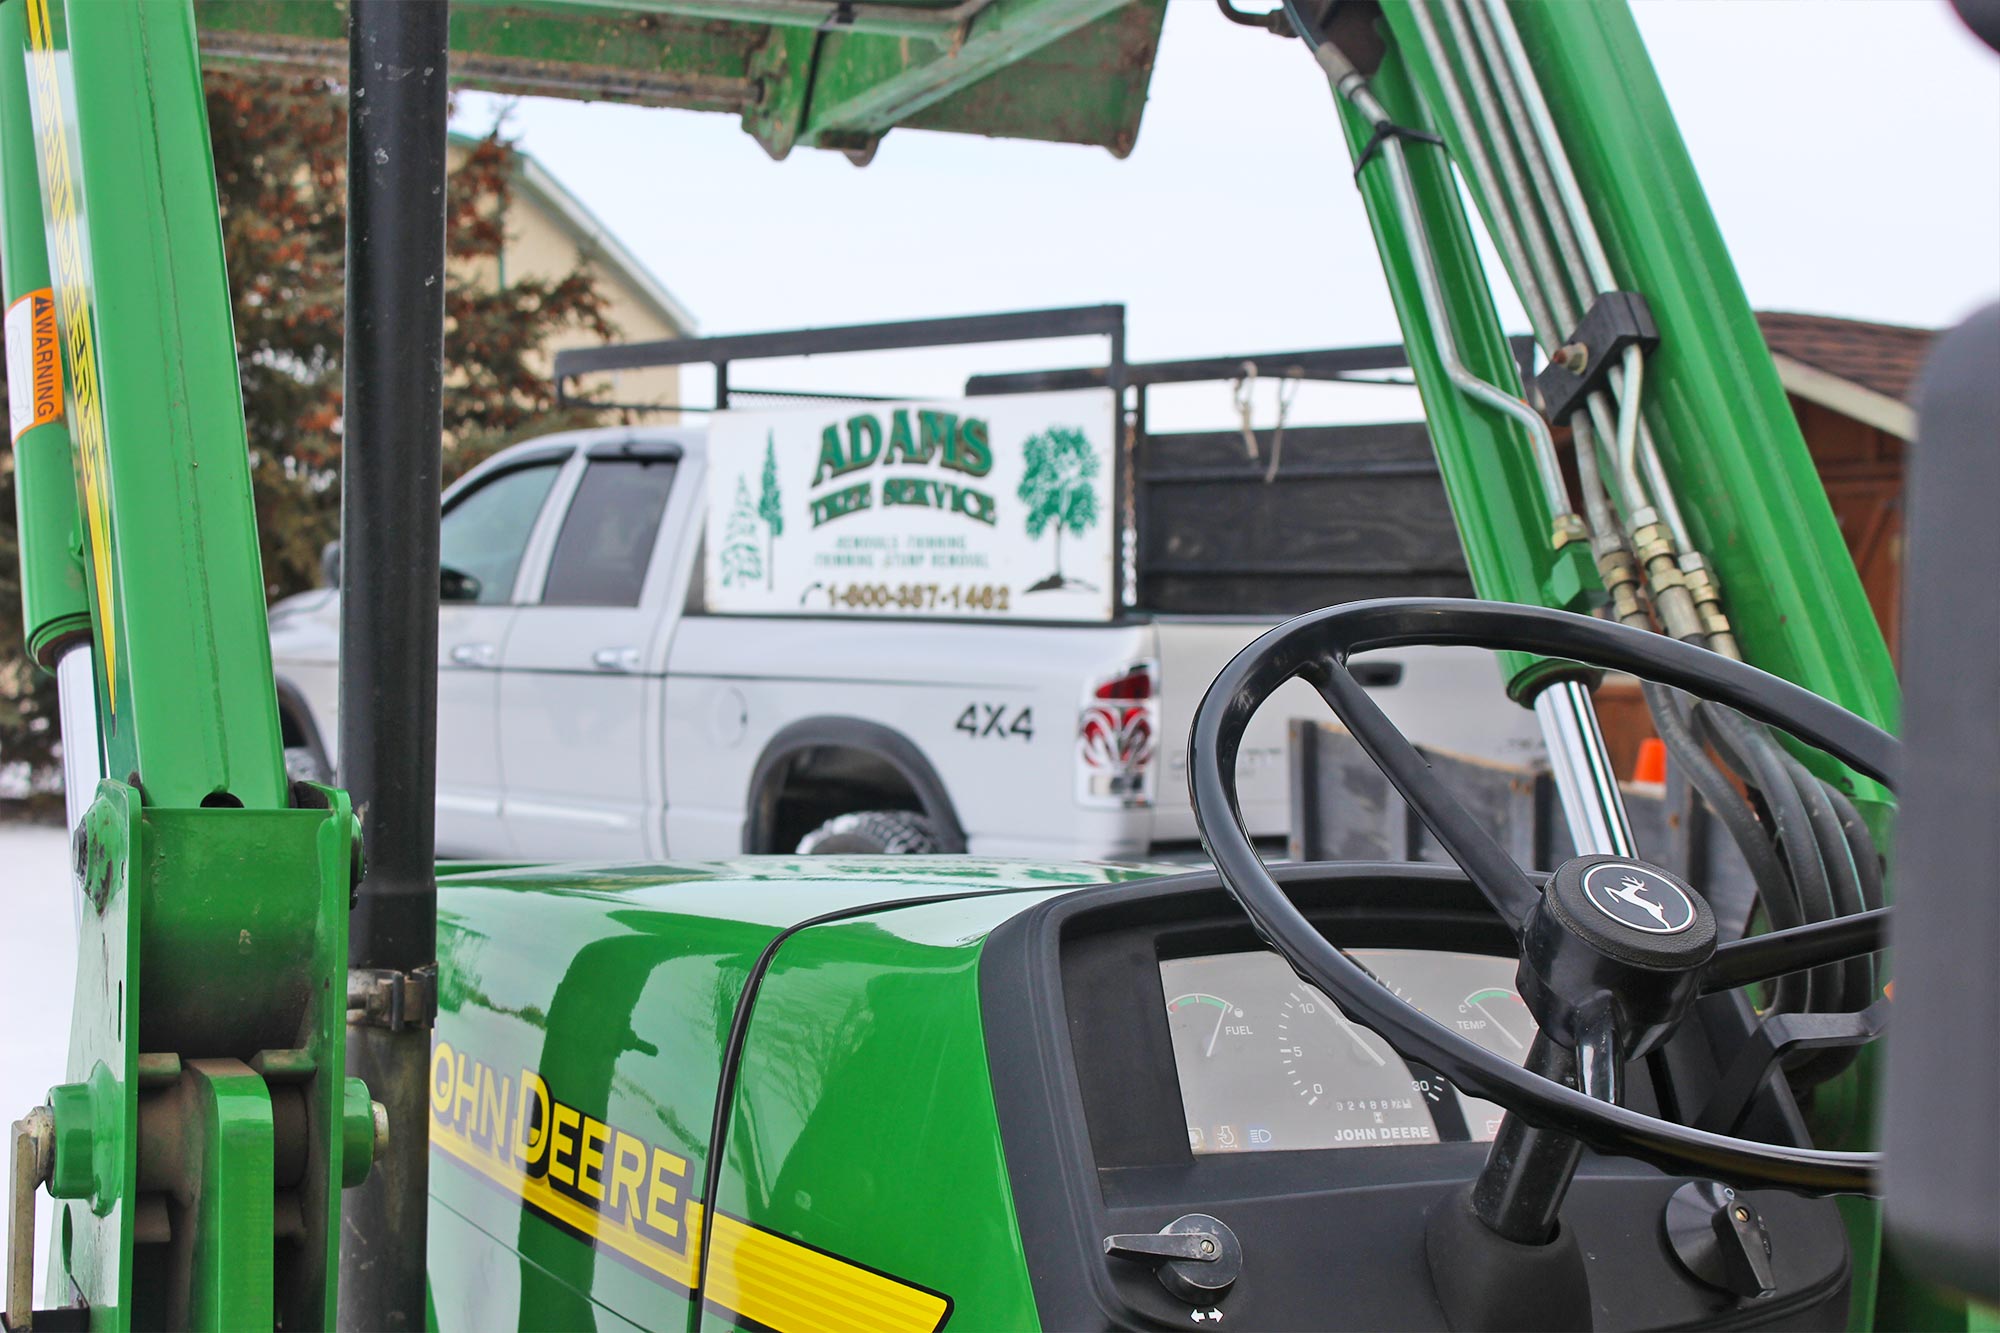 Adams Tree Service tractor and truck